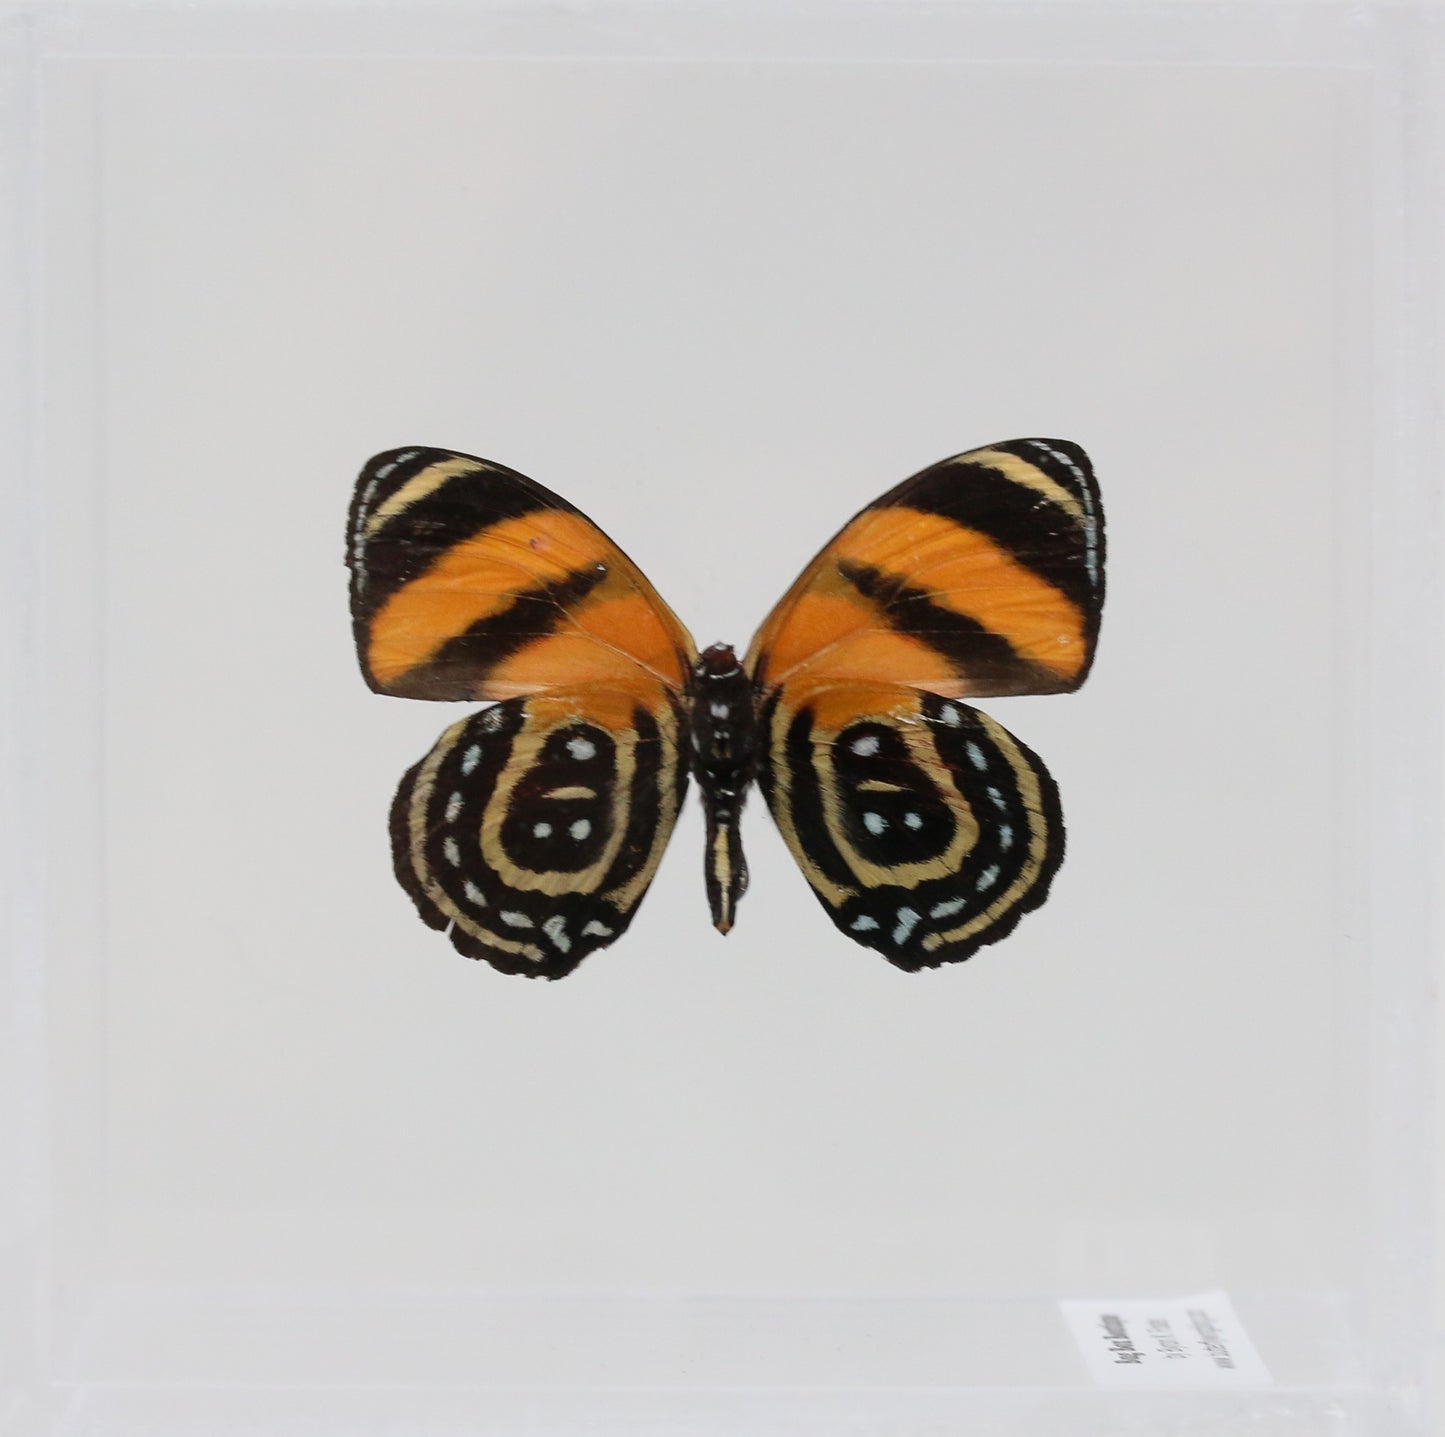 9040406 - Real Butterfly Acrylic Display Box - 4"X4" - BD Butterfly (Callicore cynosura )  - Ventral